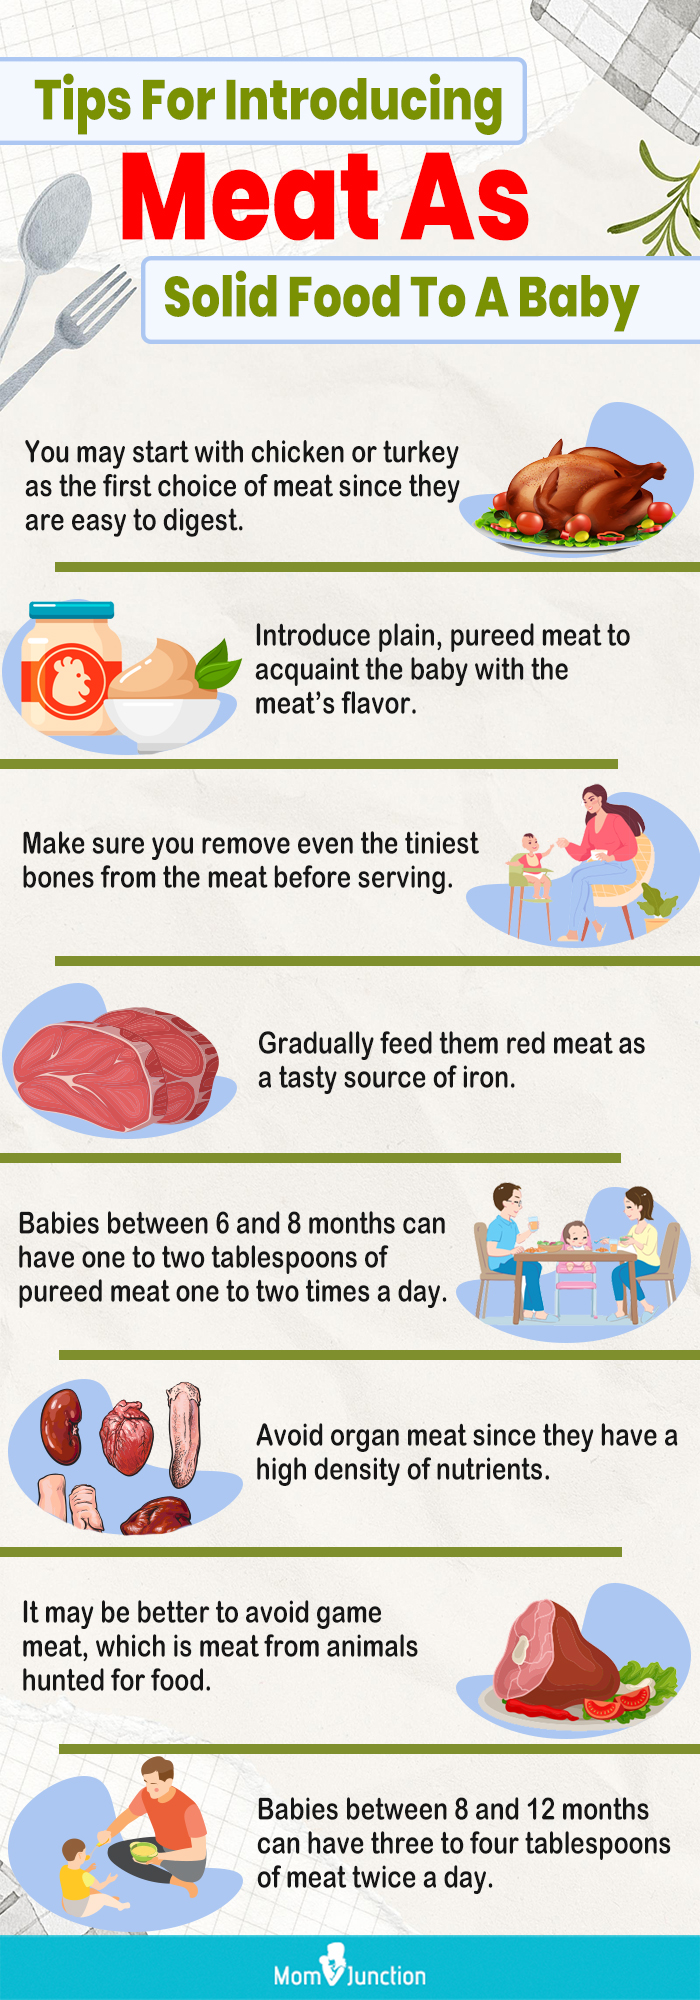 https://www.momjunction.com/wp-content/uploads/2022/10/Tips-For-Introducing-Meat-As-Solid-Food-To-A-Baby.jpg